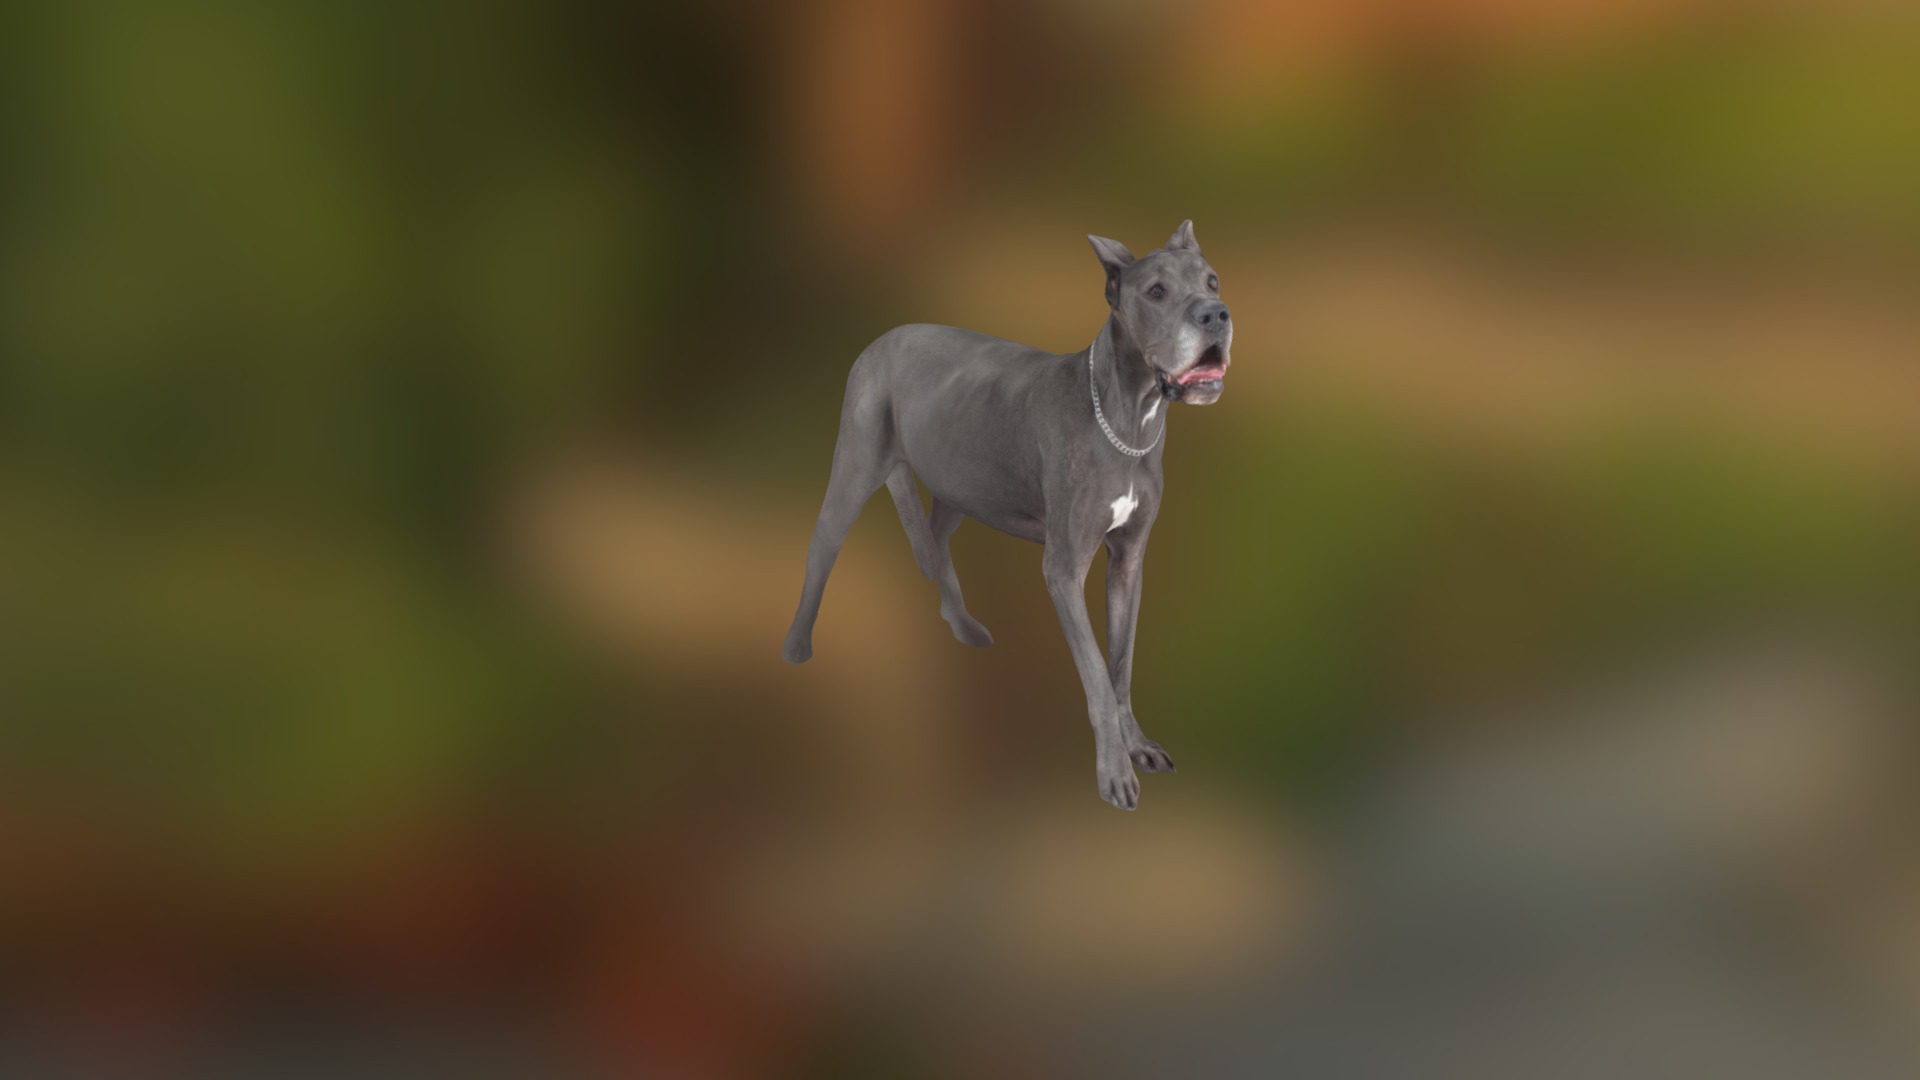 3D model Danua - This is a 3D model of the Danua. The 3D model is about a dog jumping in the air.